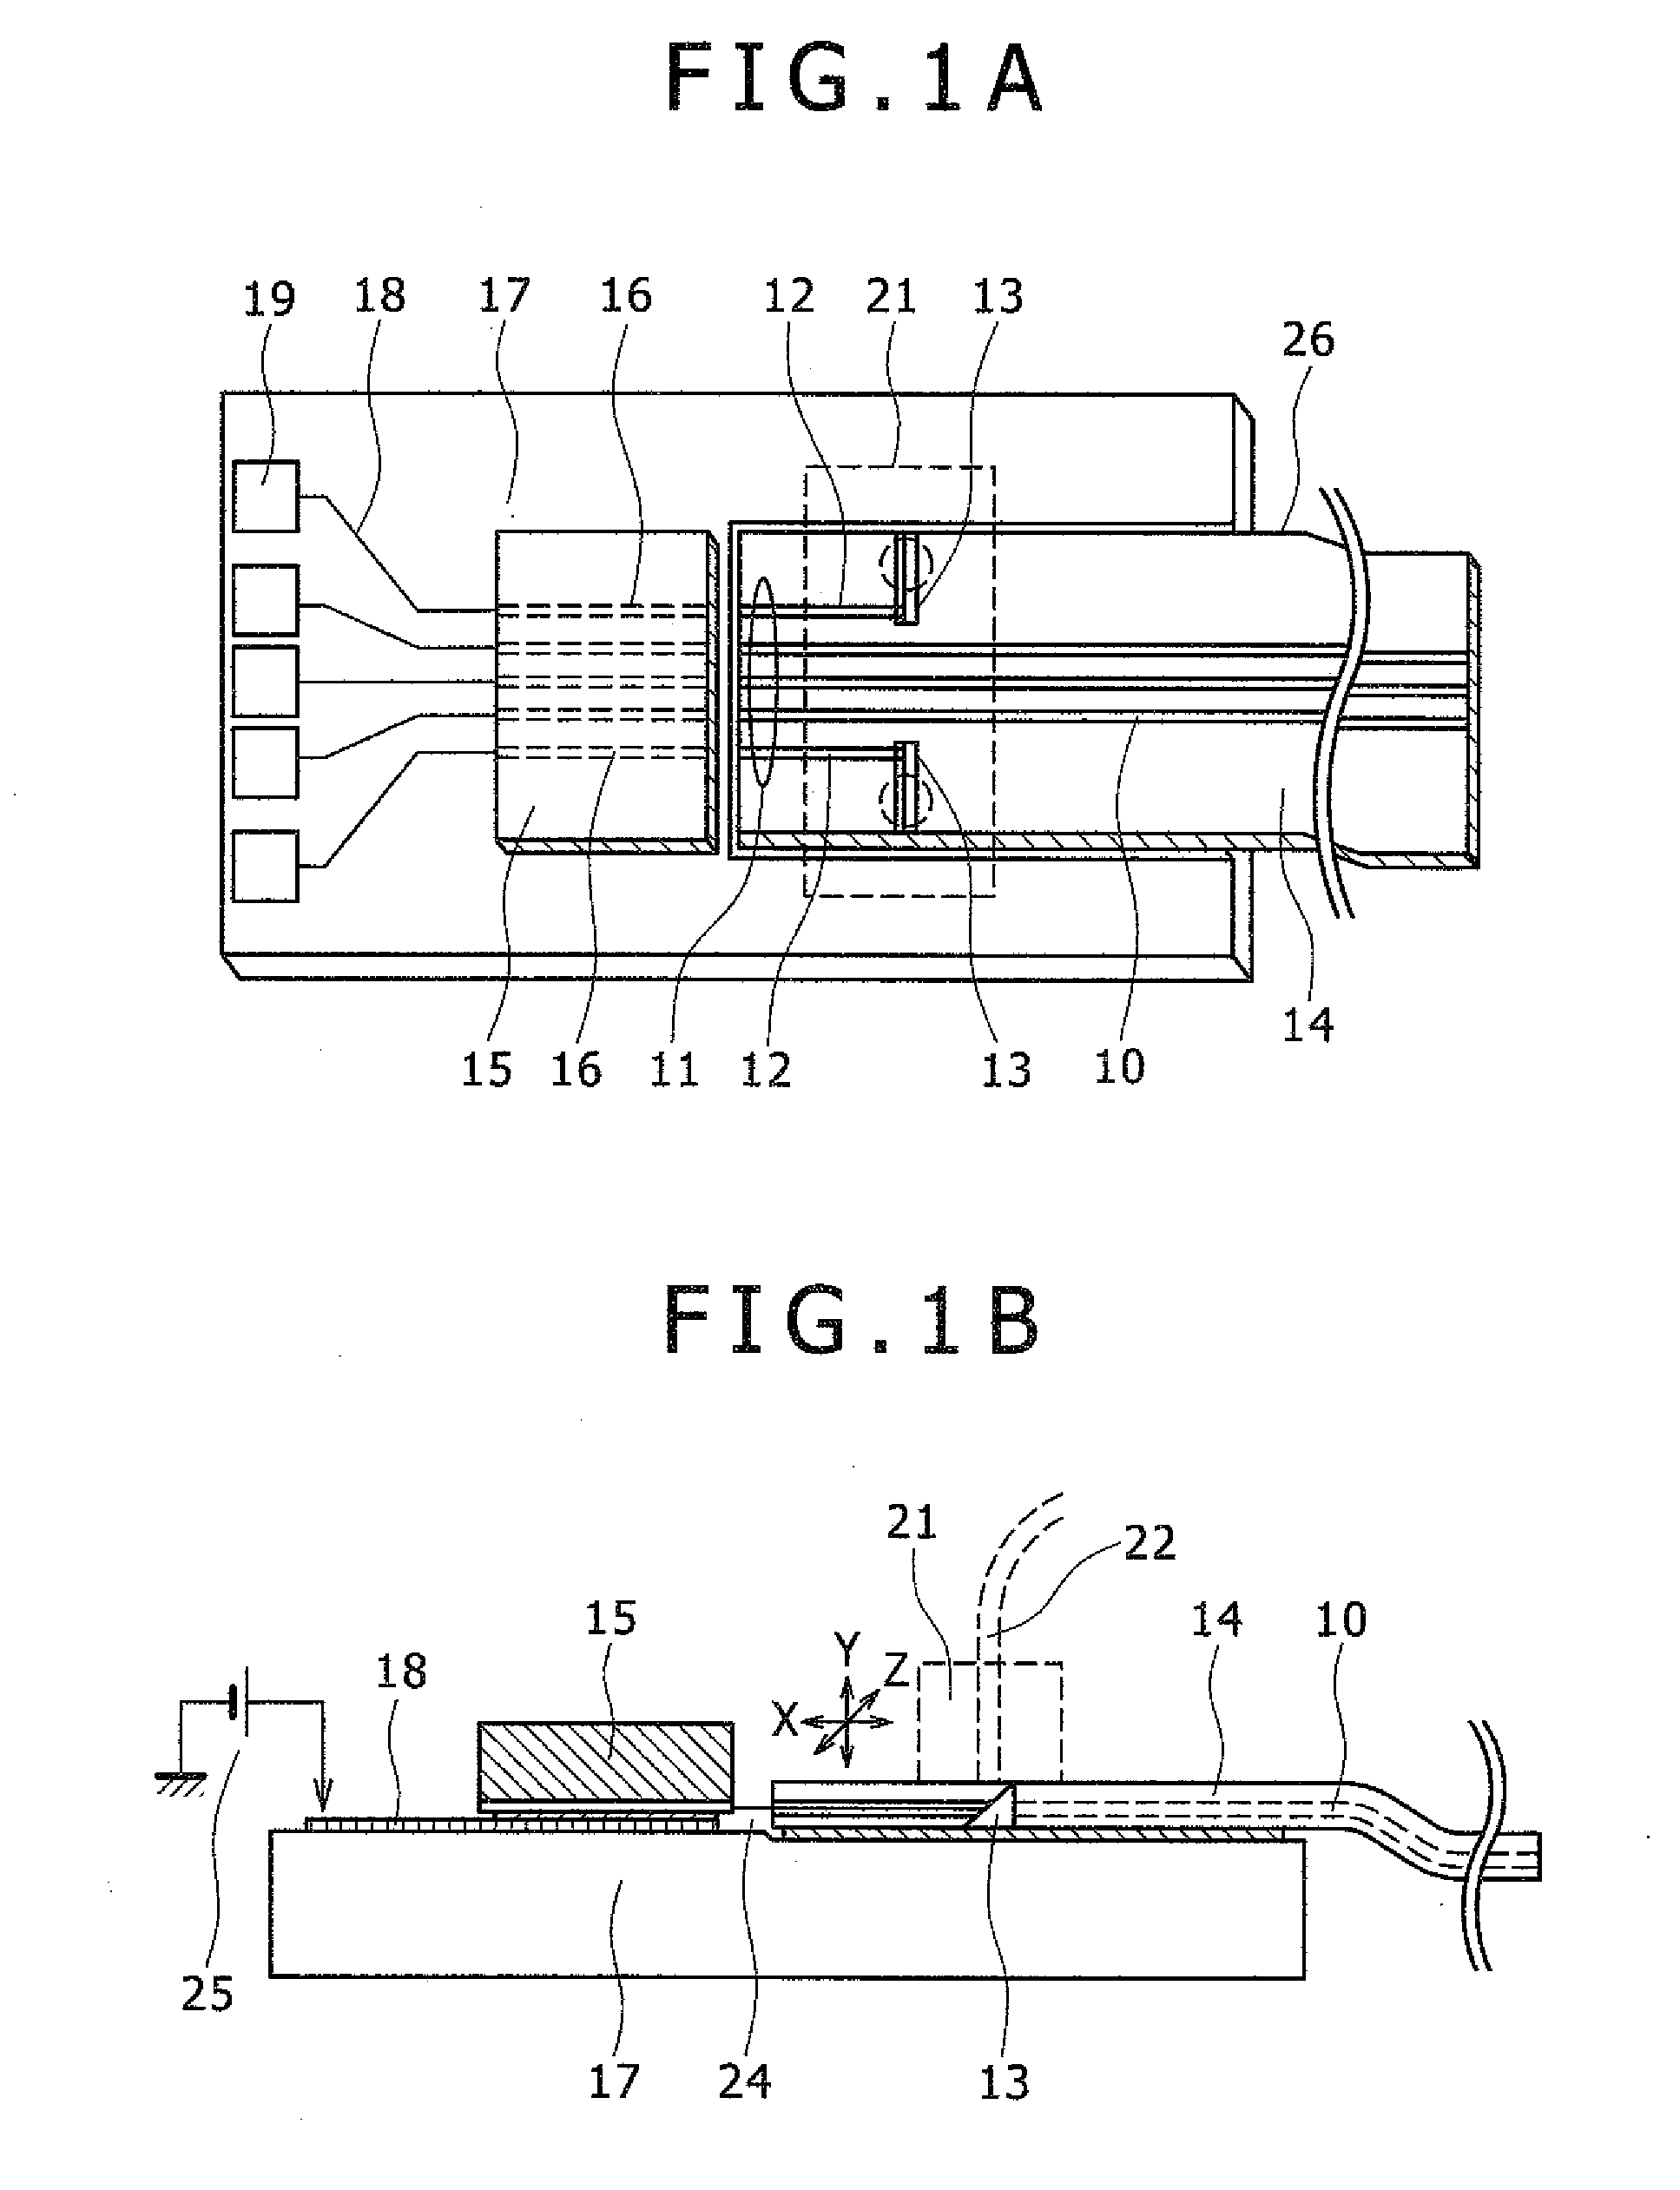 Planar optical waveguide array module and method of fabricating the same